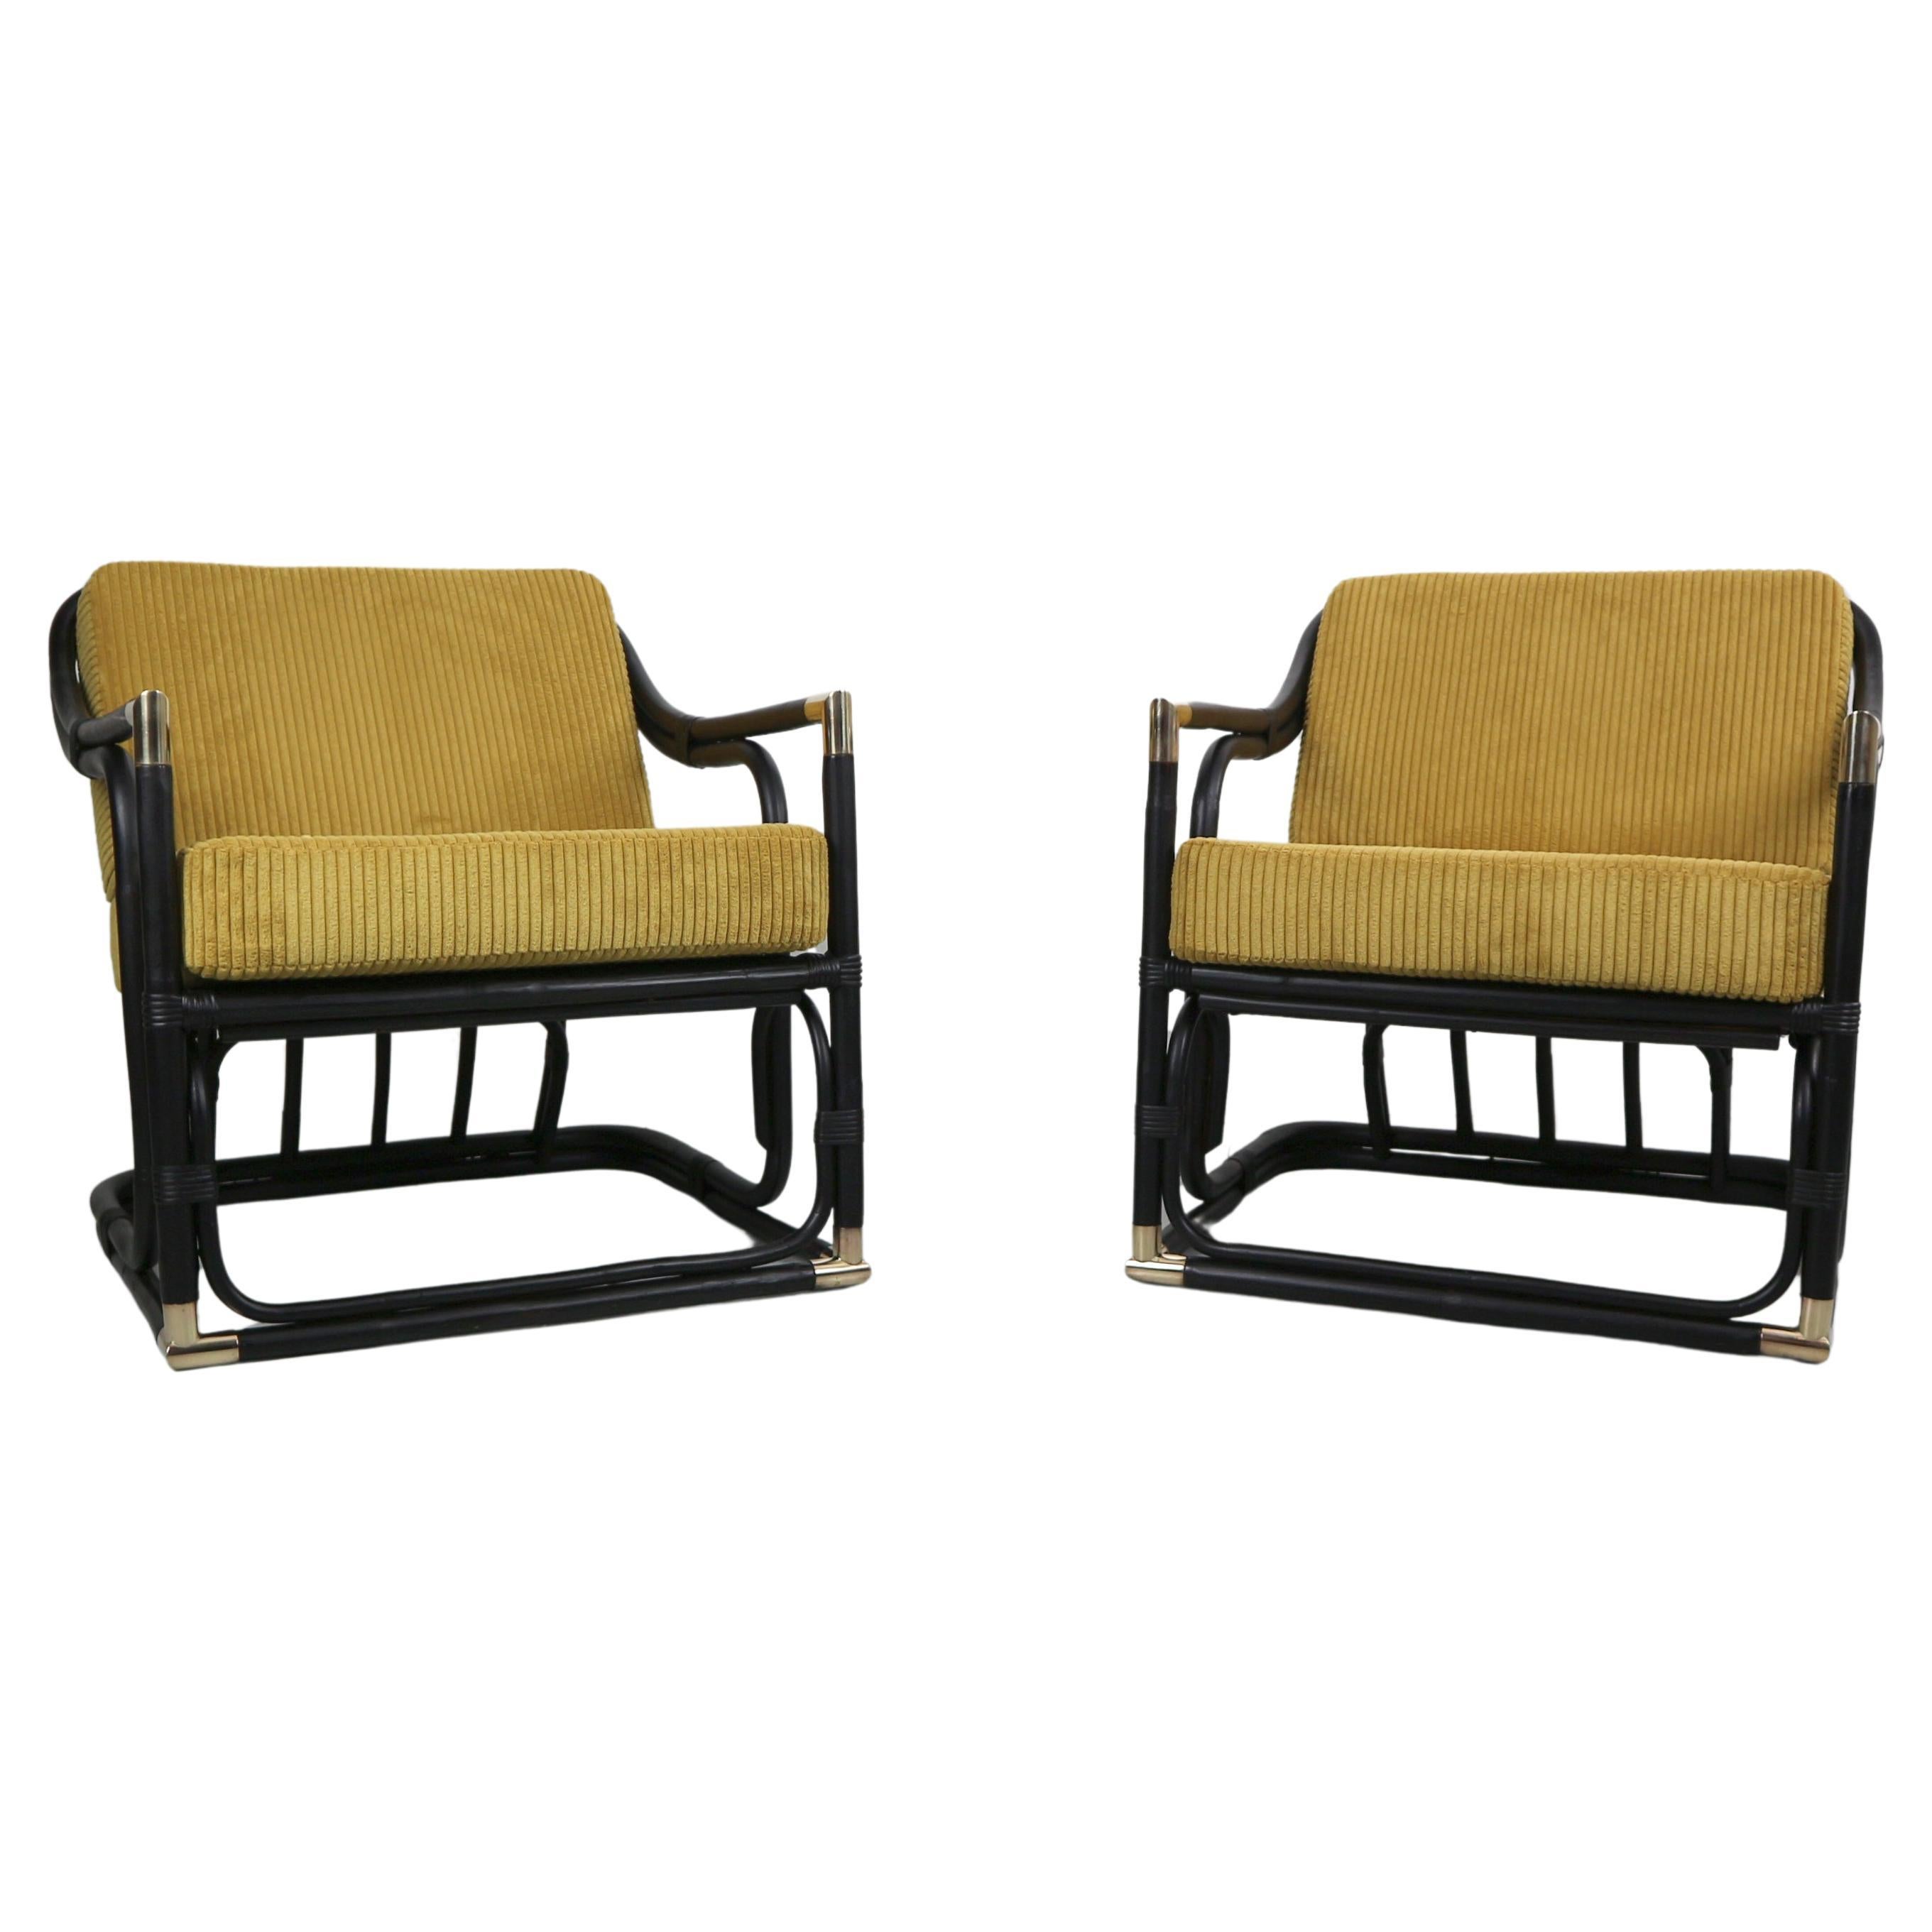 Pair of Early 20th Century Bamboo and Brass Lounger, France